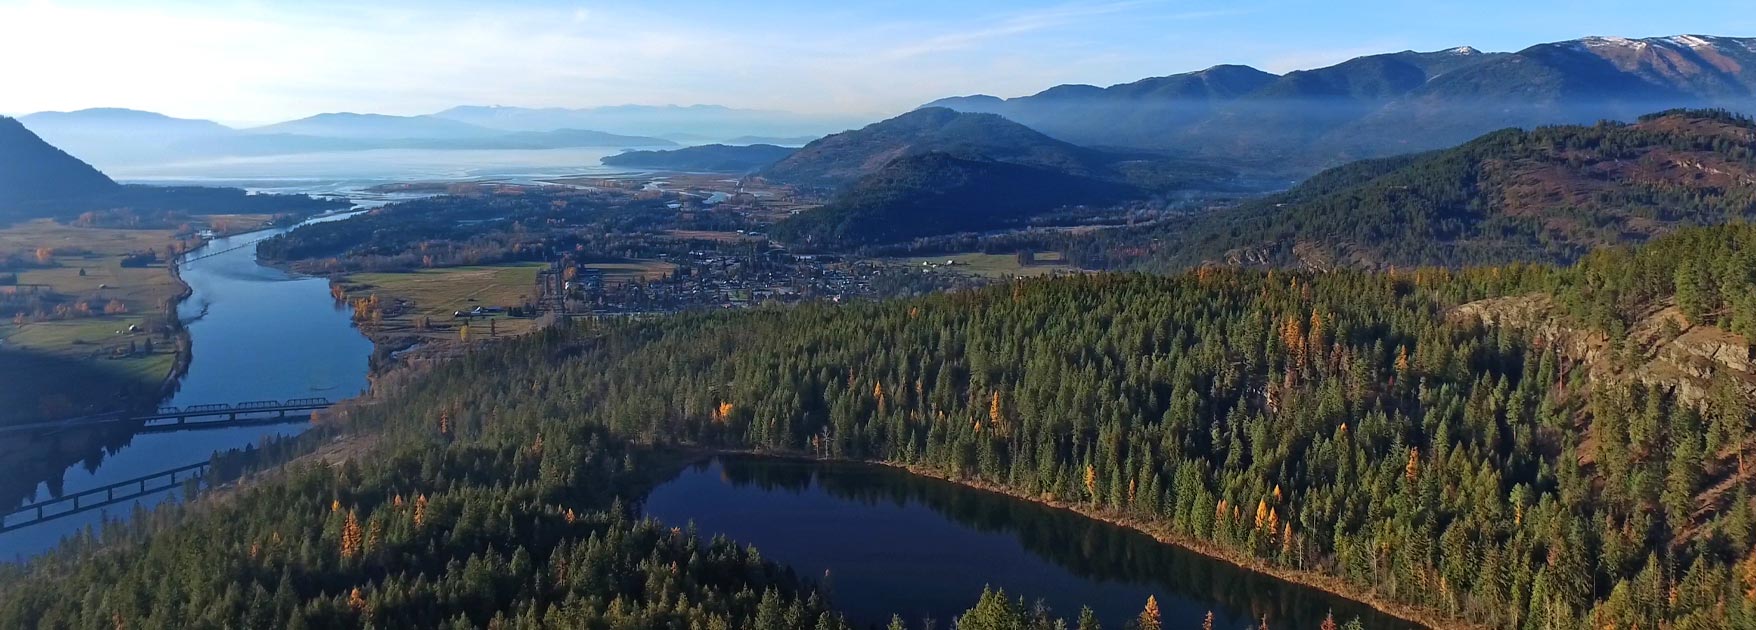 Antelope Lake overlooking the town of Clark Fork with the Clark Fork River to the left and Lake Pend Oreille in the background